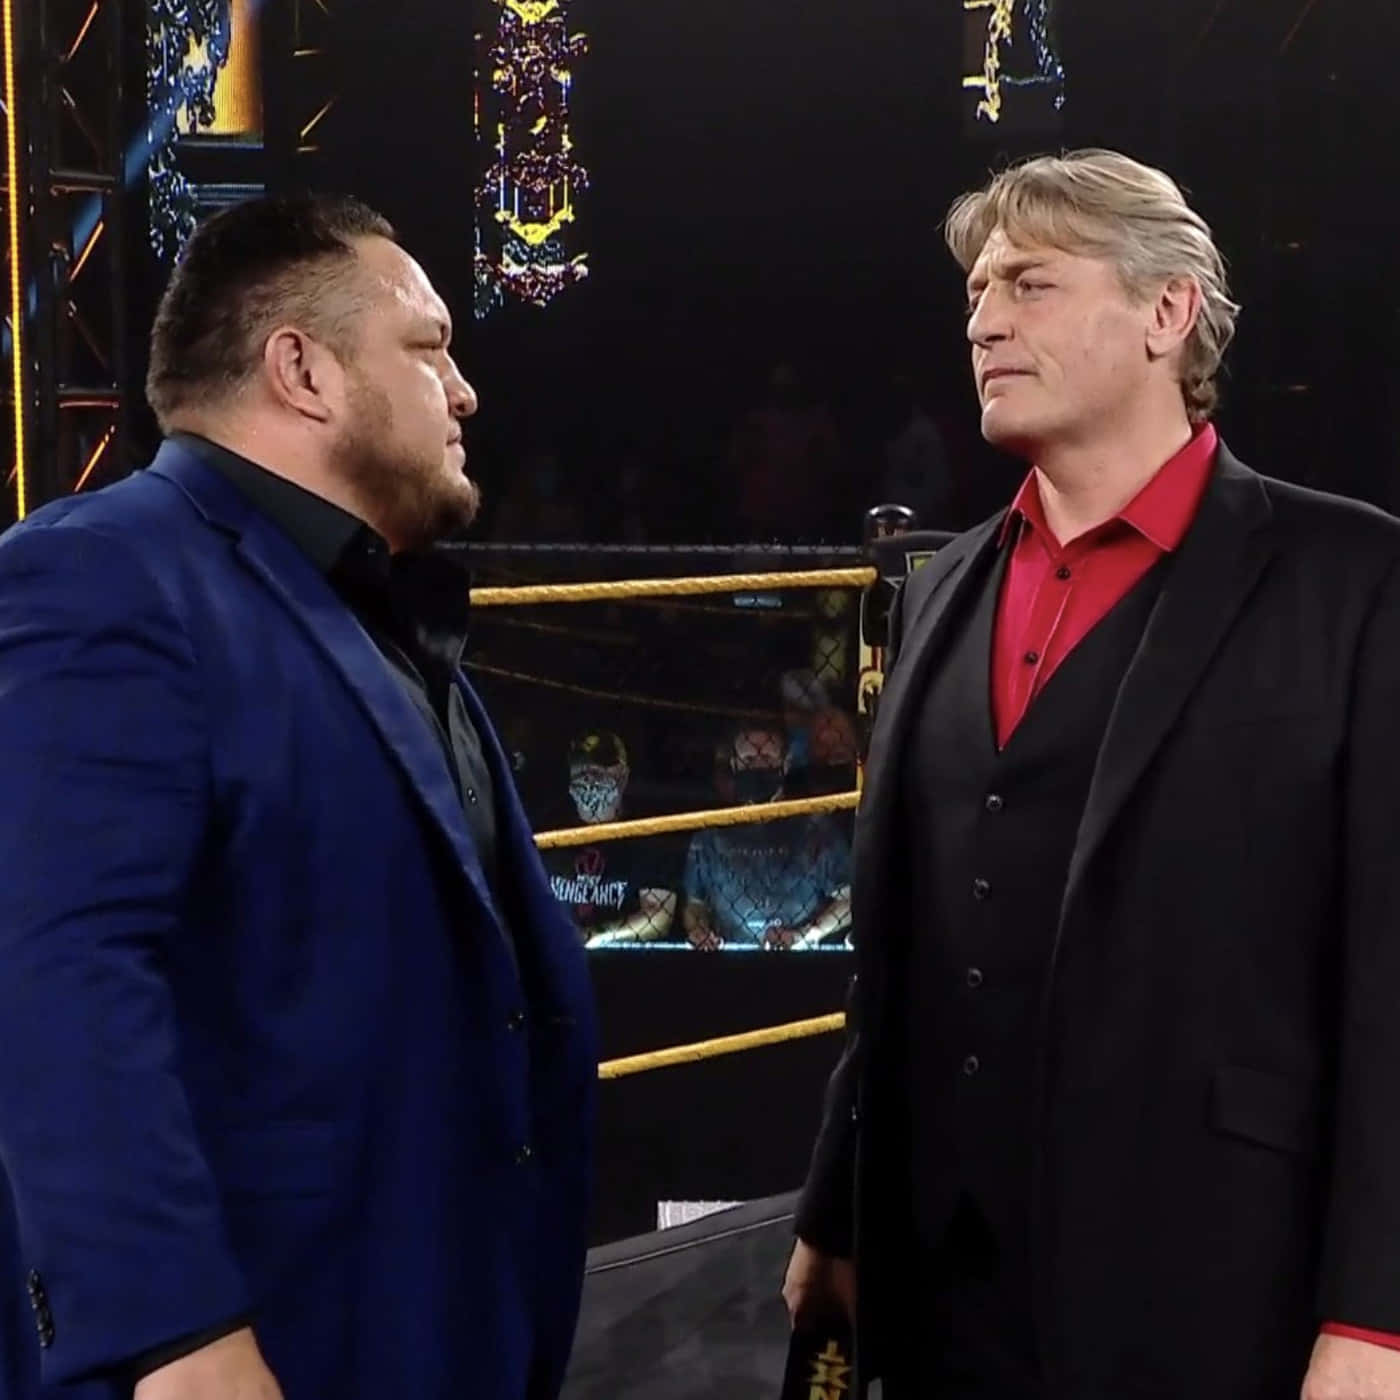 Samoajoe Wwe Nxt William Regal Enforcer Would Be Translated To: Samoa Joe Wwe Nxt William Regal Försvarare, When Discussing Computer Or Mobile Wallpaper. Wallpaper